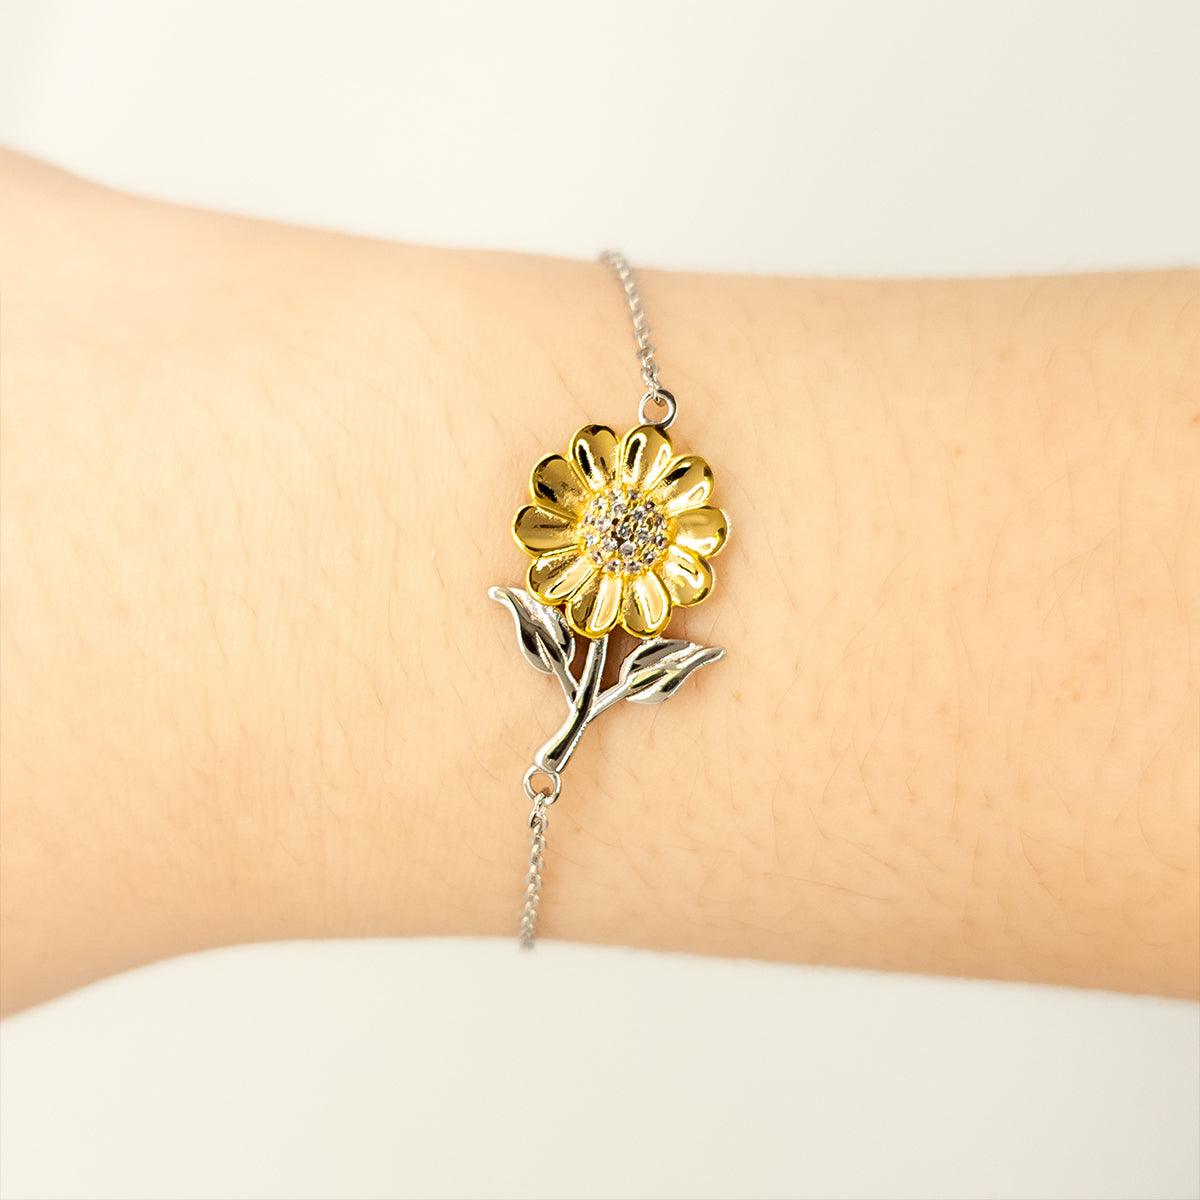 Florist Sunflower Bracelet - Thanks for being who you are - Birthday Christmas Jewelry Gifts Coworkers Colleague Boss - Mallard Moon Gift Shop